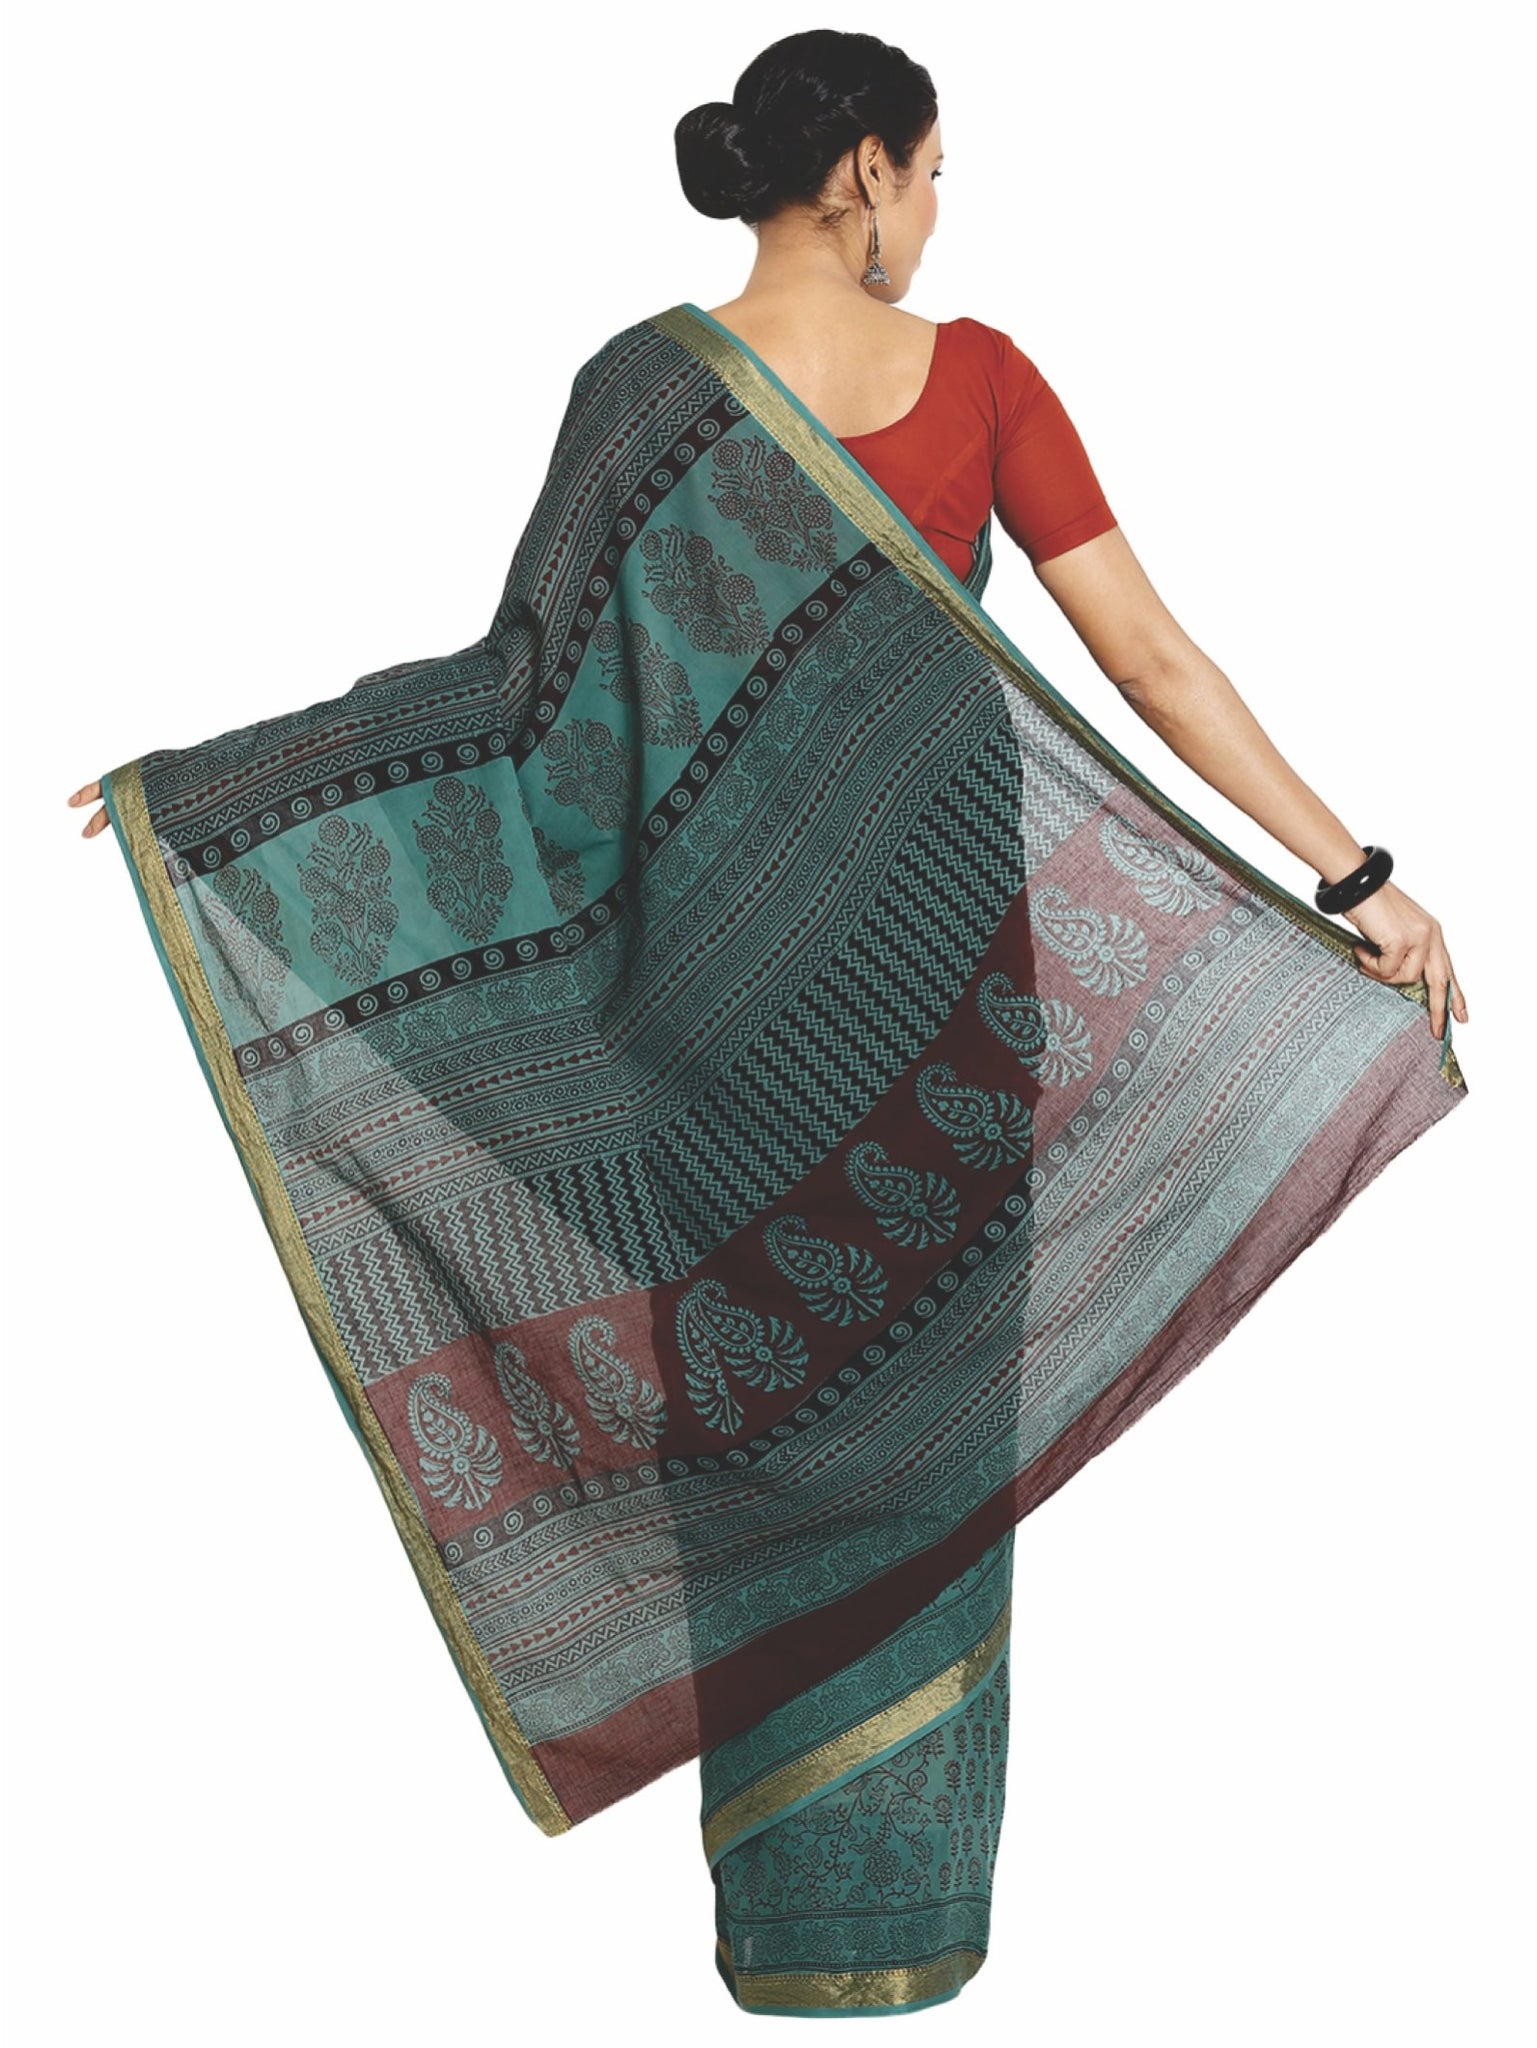 Teal Green Cotton Hand Block Bagh Print Handcrafted Saree-Saree-Kalakari India-ZIBASA0049-Bagh, Cotton, Geographical Indication, Hand Blocks, Hand Crafted, Heritage Prints, Natural Dyes, Sarees, Sustainable Fabrics-[Linen,Ethnic,wear,Fashionista,Handloom,Handicraft,Indigo,blockprint,block,print,Cotton,Chanderi,Blue, latest,classy,party,bollywood,trendy,summer,style,traditional,formal,elegant,unique,style,hand,block,print, dabu,booti,gift,present,glamorous,affordable,collectible,Sari,Saree,printe